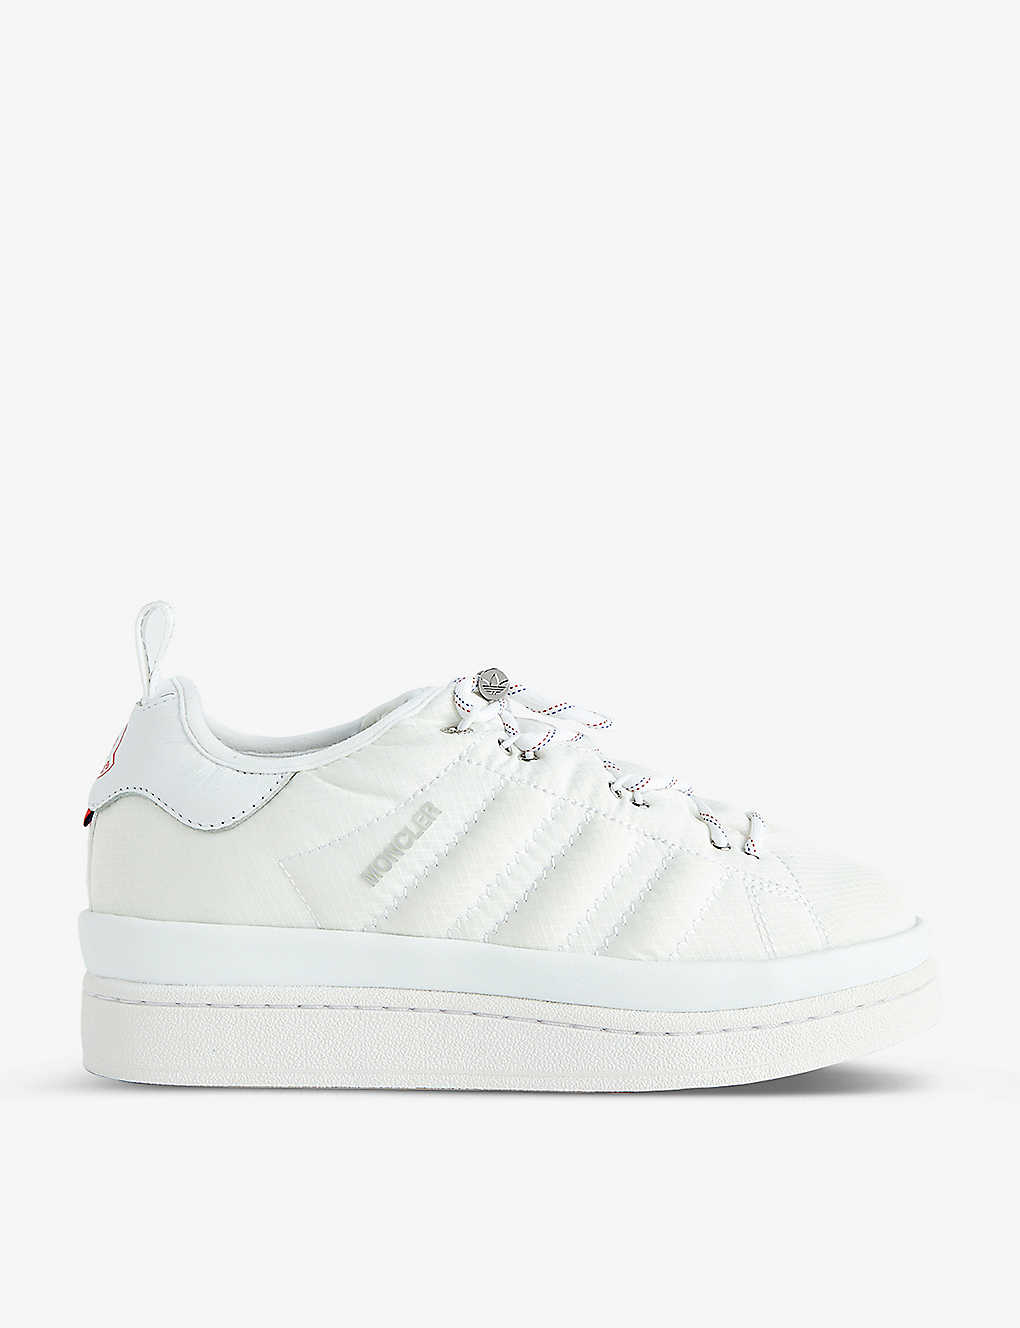 Moncler Genius Womens 1 X Adidas Campus Low-top Woven Trainers In White